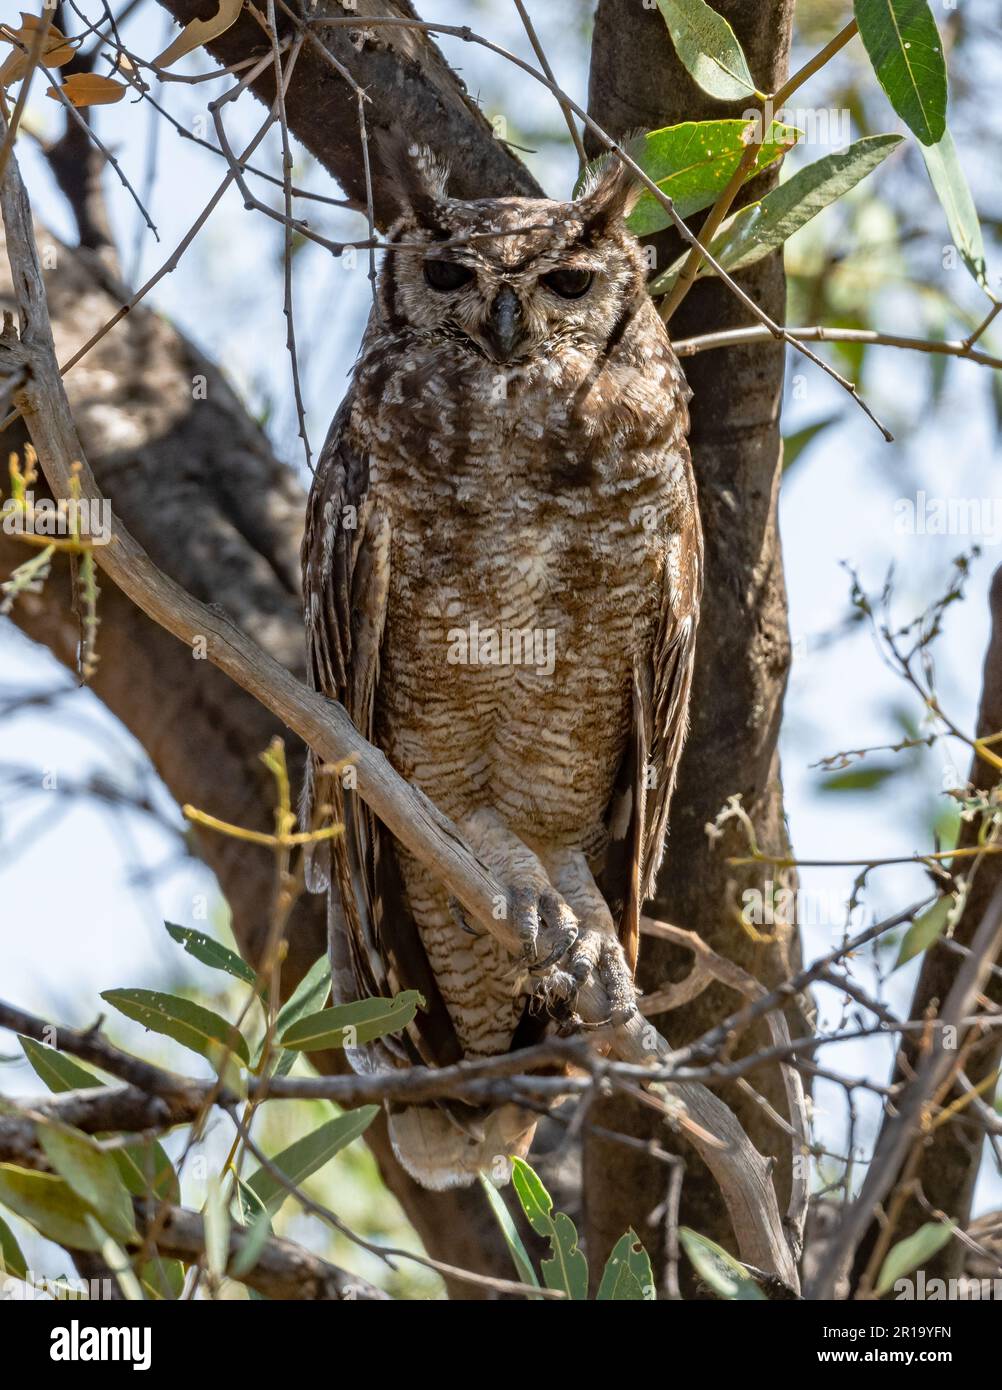 A Grayish Eagle-Owl (Bubo cinerascens) perched on a brach during day time. Kenya, Africa. Stock Photo